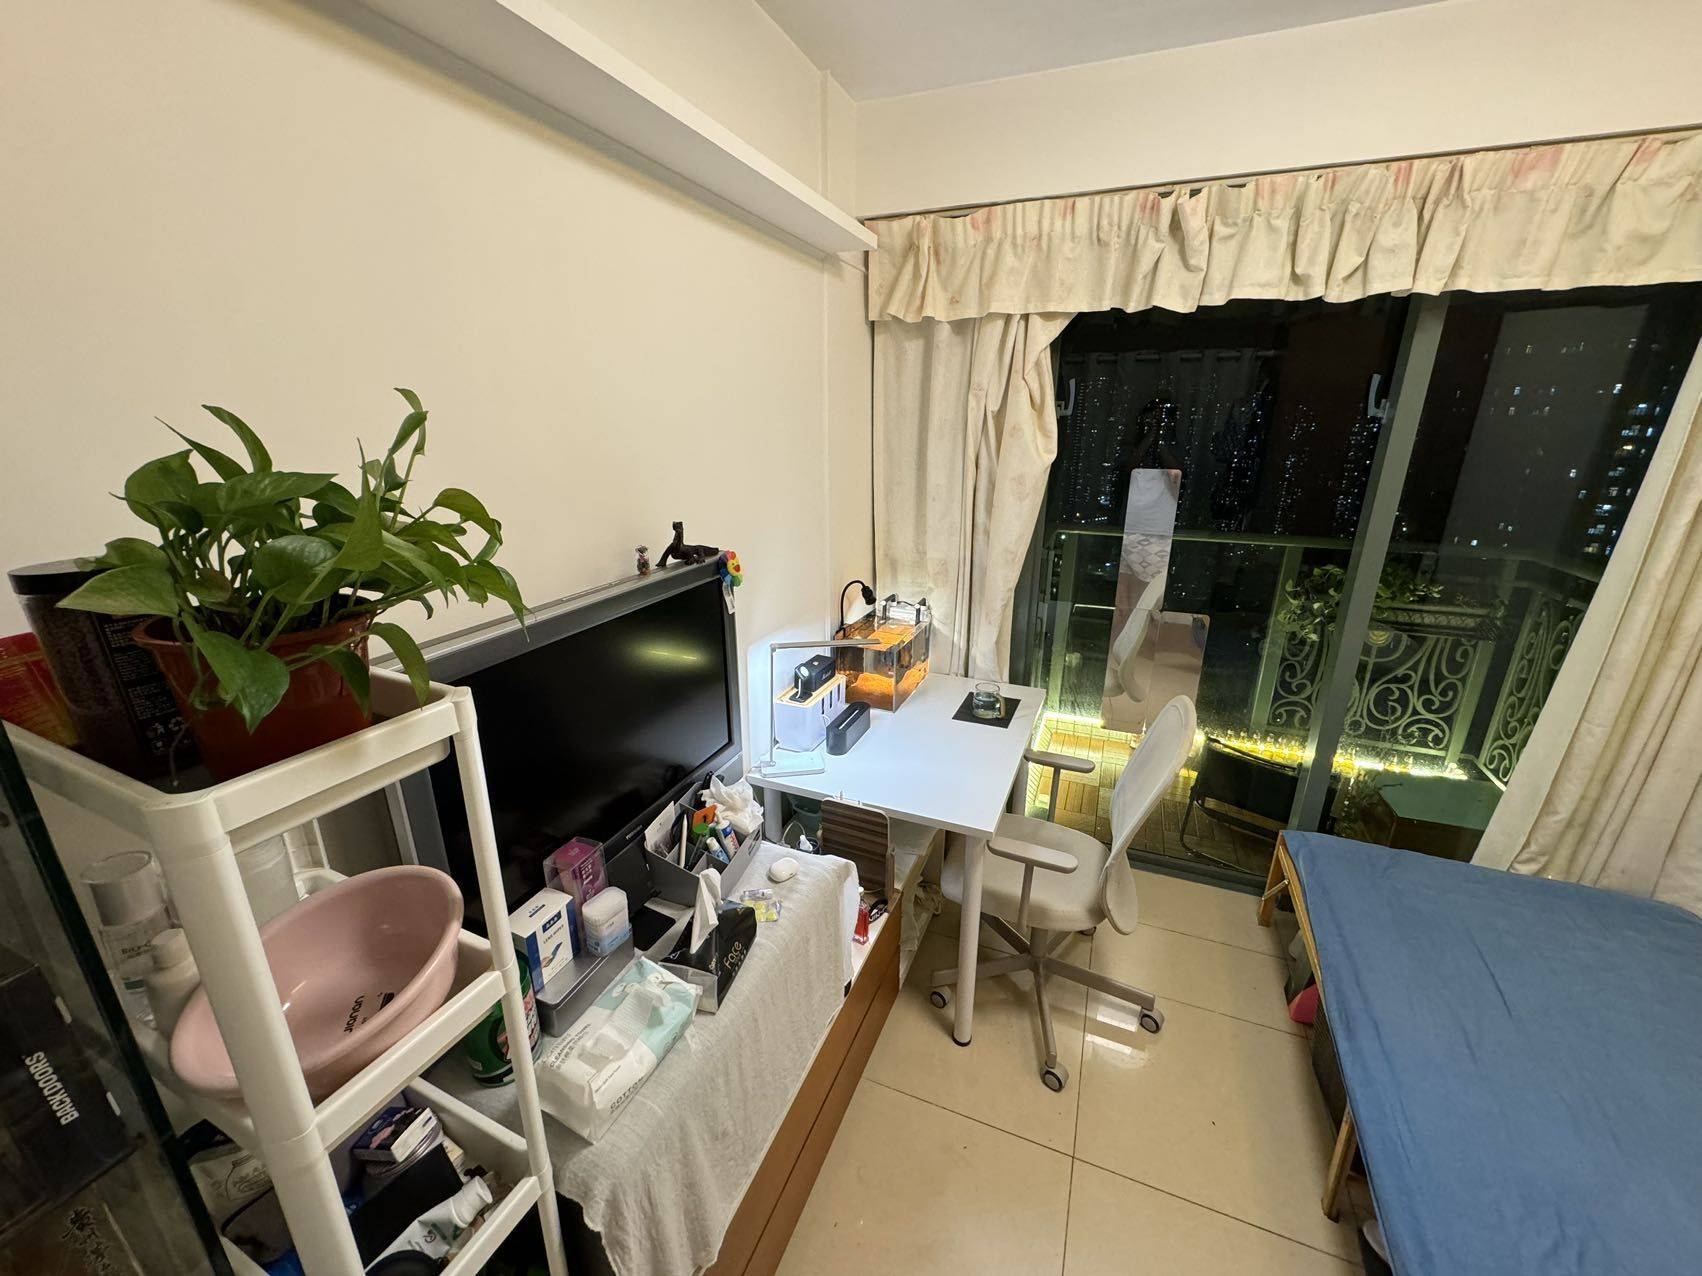 Hong Kong-New Territories-Cozy Home,Clean&Comfy,No Gender Limit,Hustle & Bustle